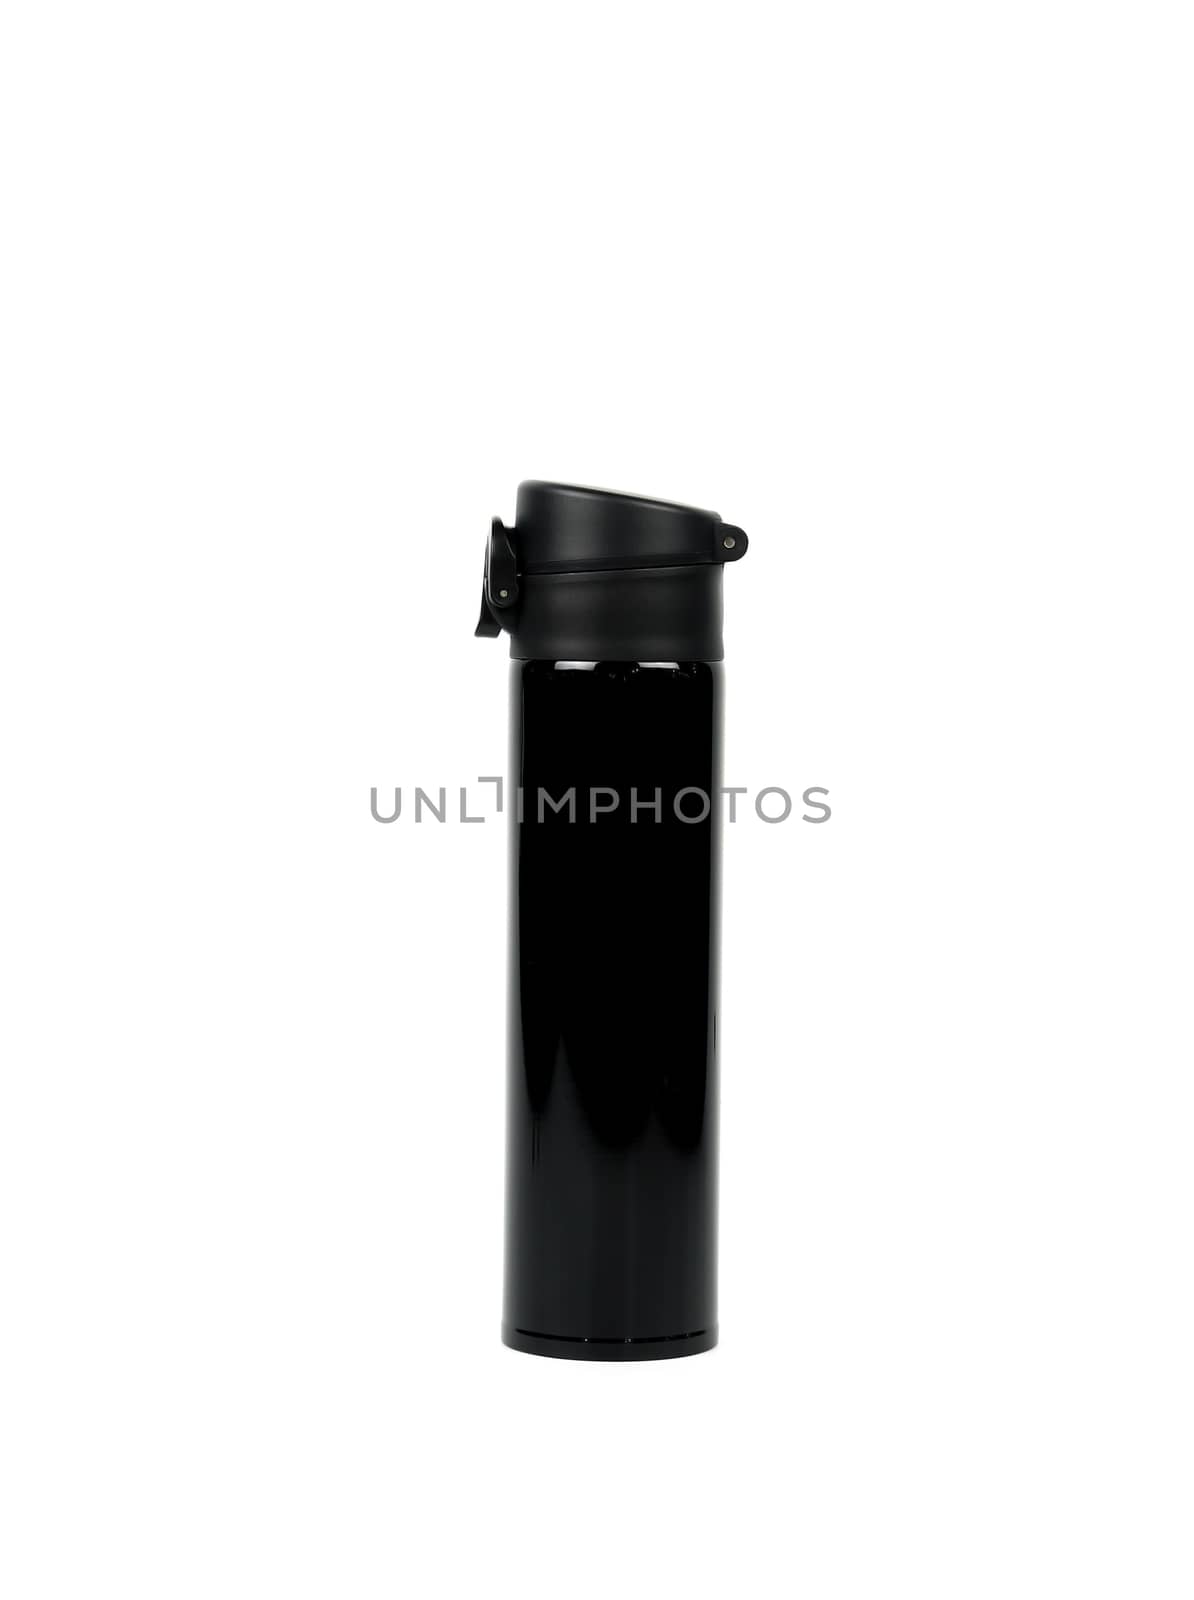 Black thermos bottle isolated on white background with copy space. Coffee and tea bottle container.